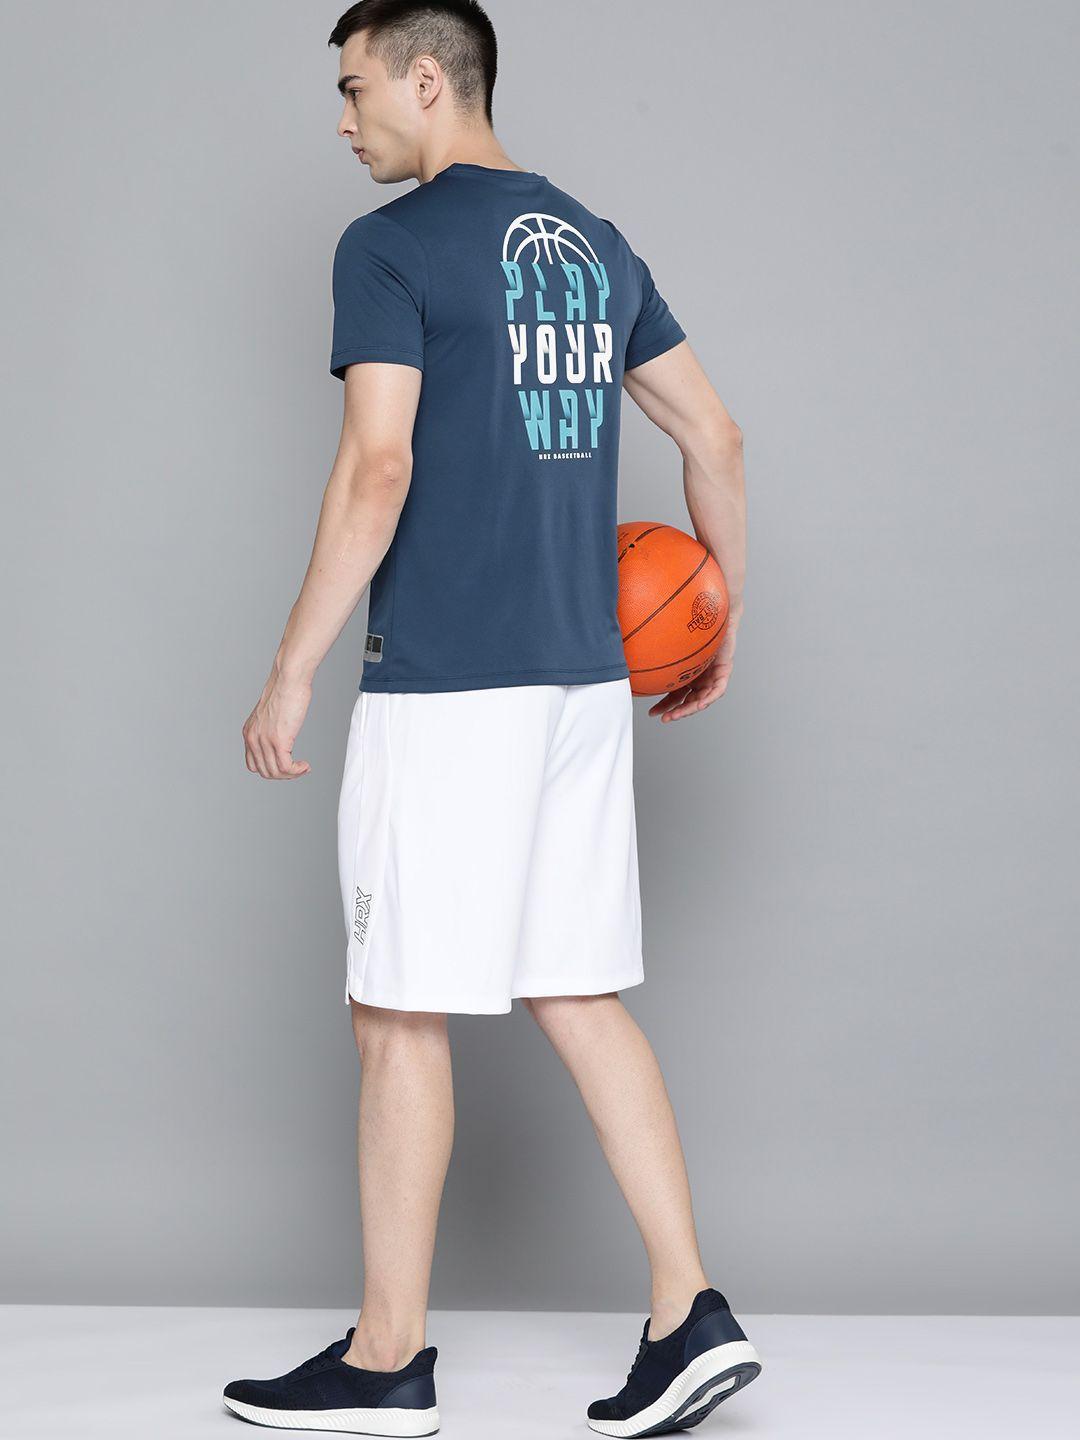 hrx by hrithik roshan men printed basketball rapid-dry t-shirt with reflective detail